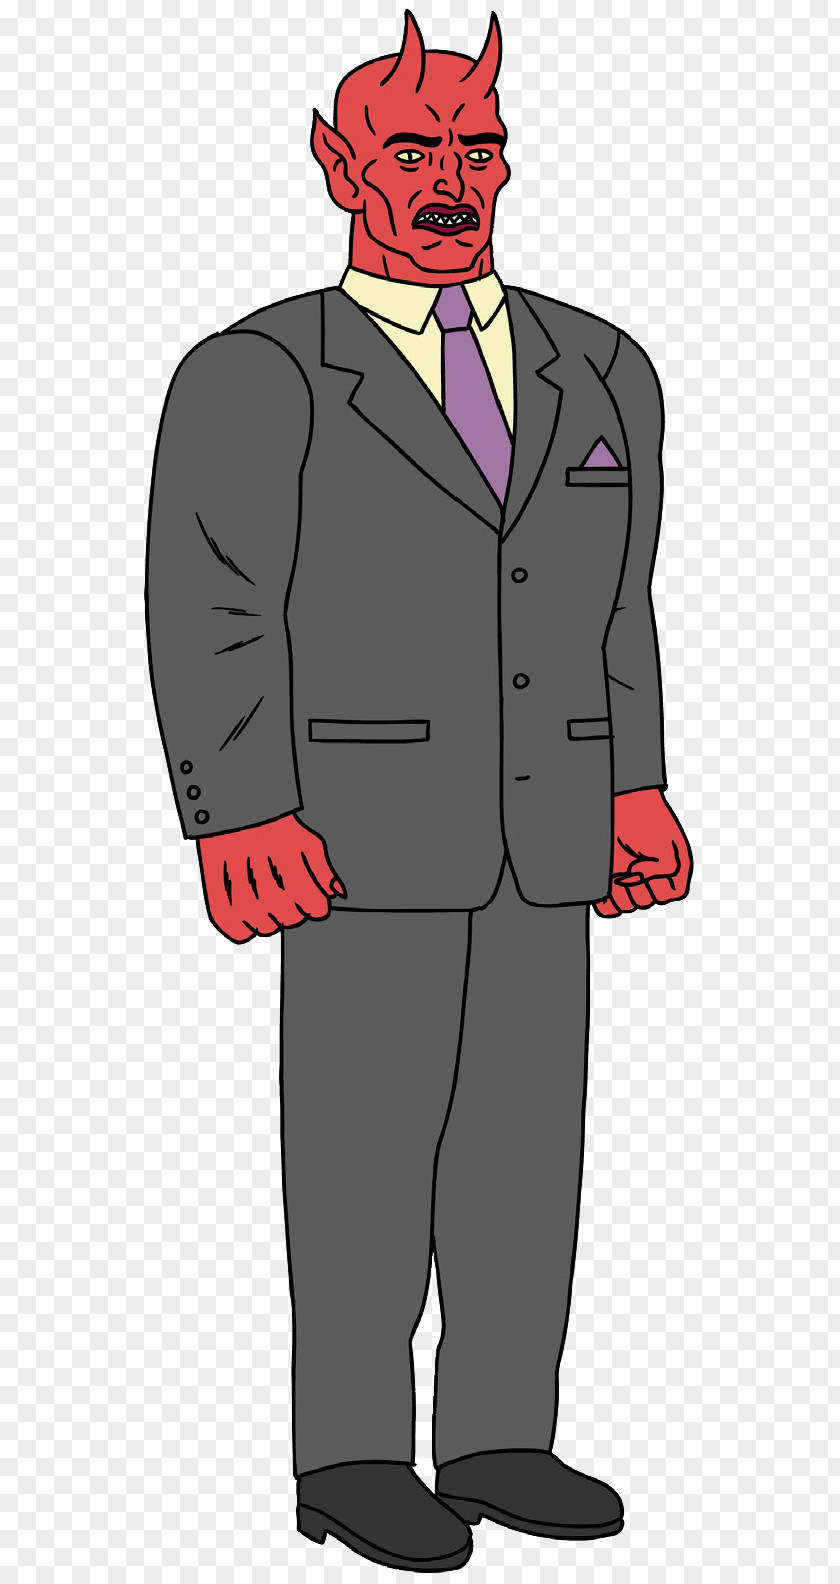 Demon Michael-Leon Wooley Ugly Americans Callie Maggotbone William Dyer Wikia PNG